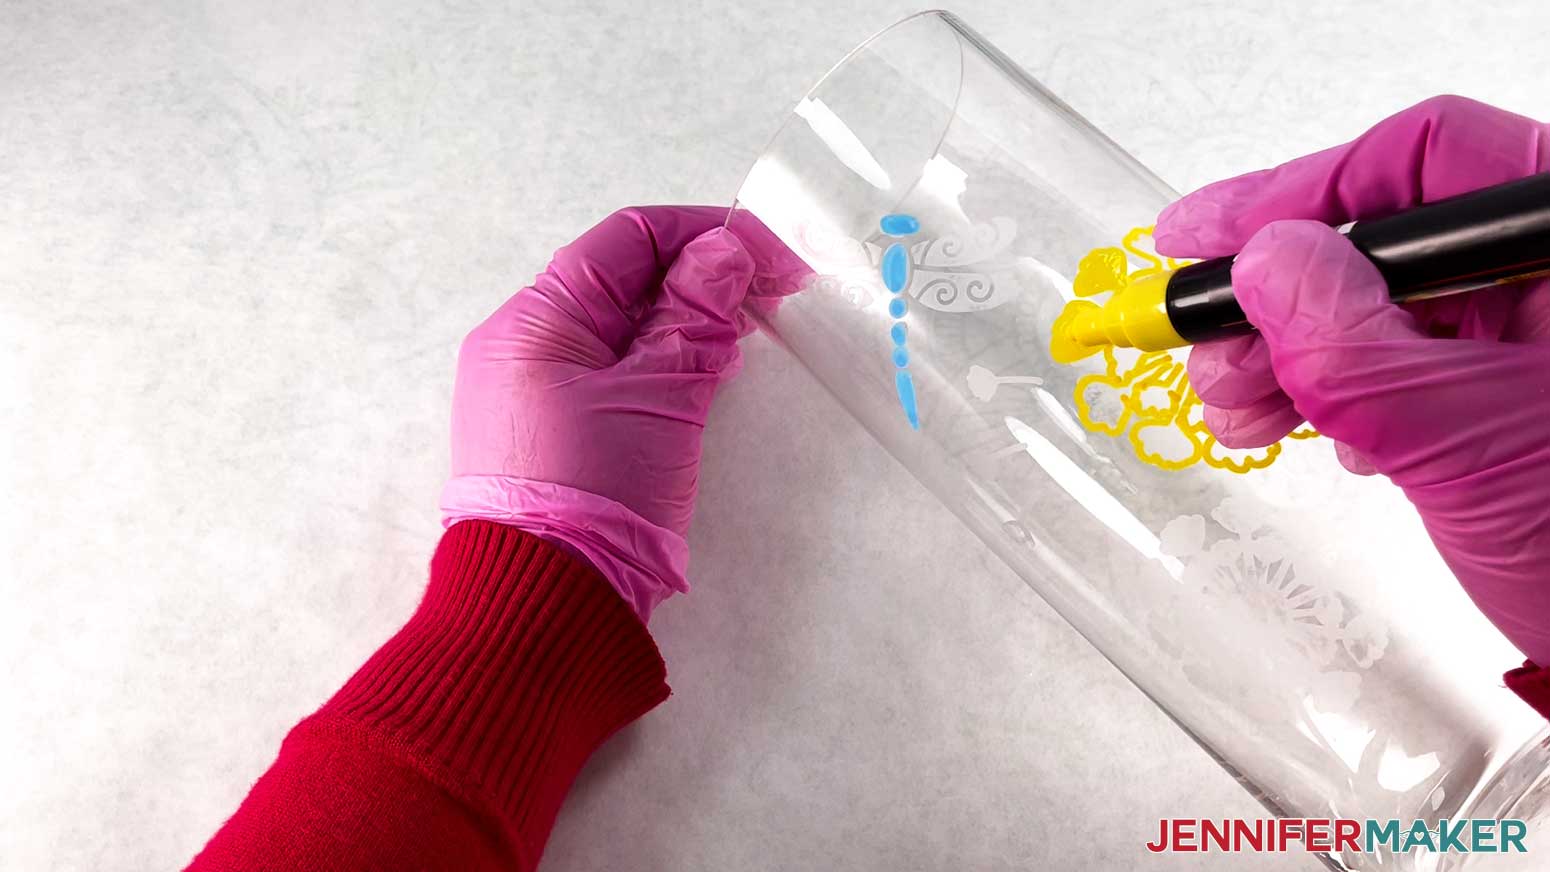 An overhead photo showing a gloved hand holding a vase in place while another gloved hand paints an etched design with a yellow paint marker. The dragonfly part of the color glass etching design is painted in blue.